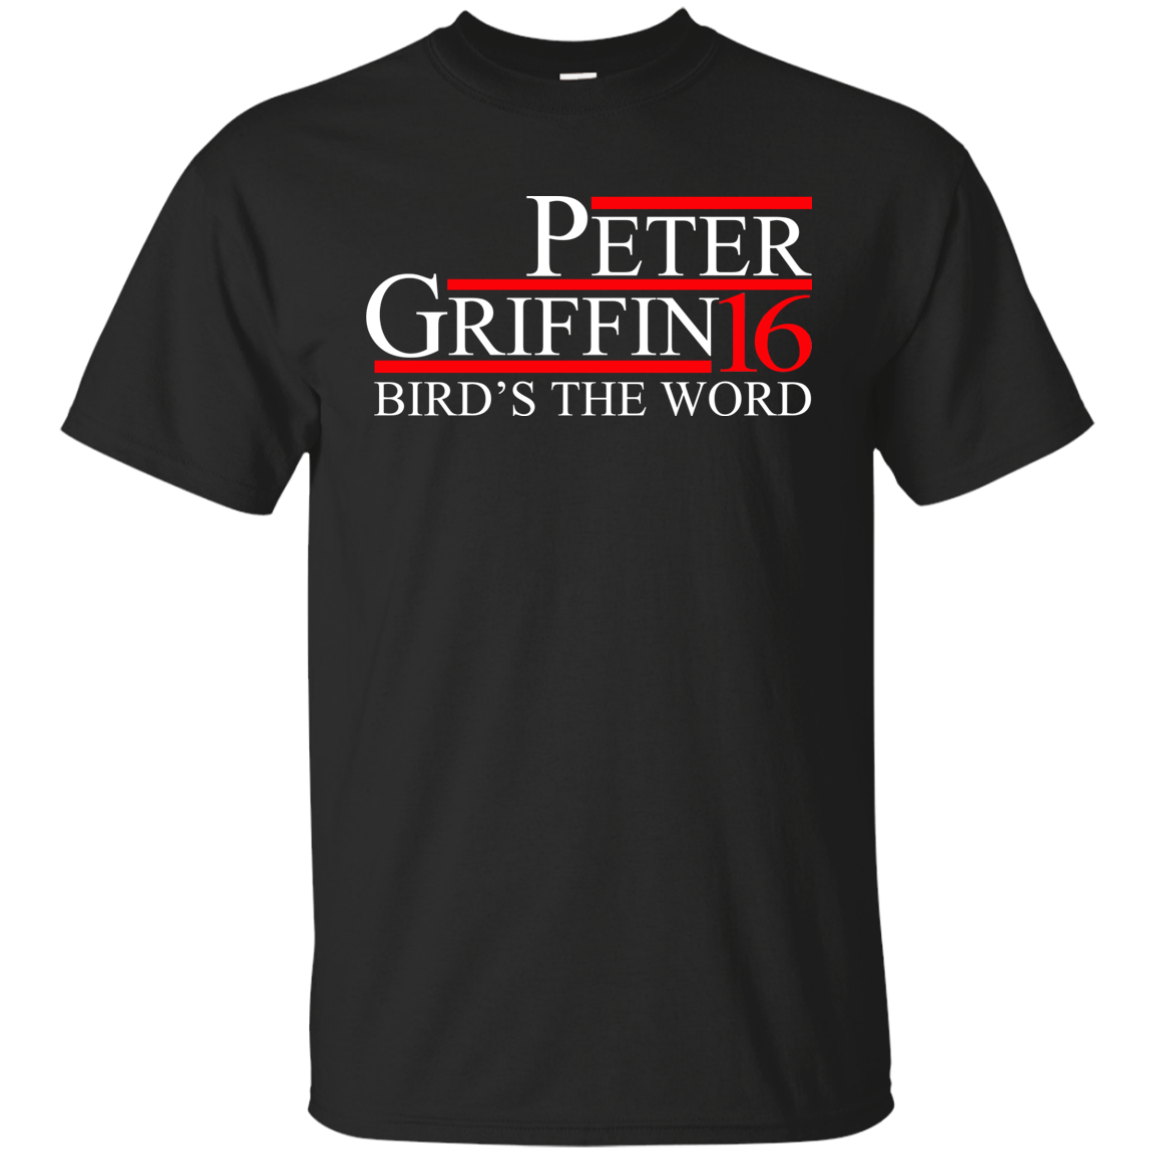 Peter Griffin 2016 T-shirt/Hoodies/Tanks - ifrogtees